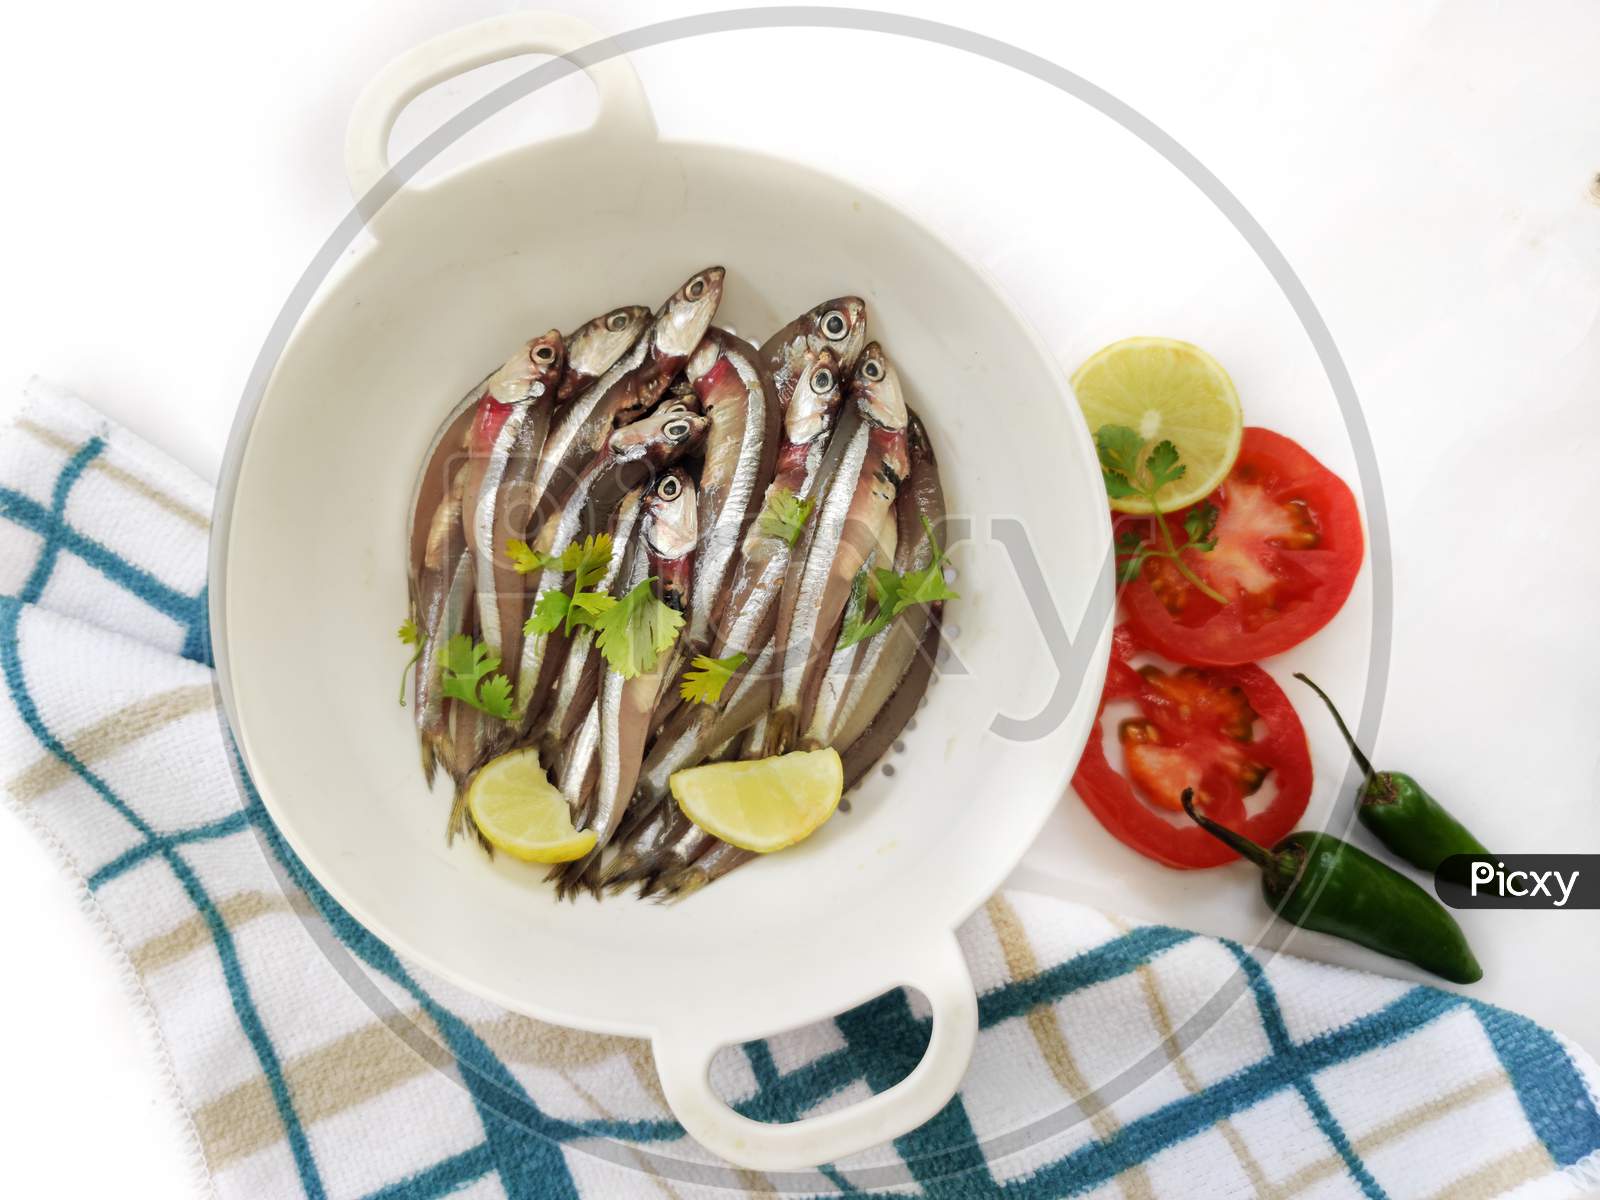 Fresh Anchovy Fish Decorated With Herbs And Vegetables On A White Background.Selective Focus.